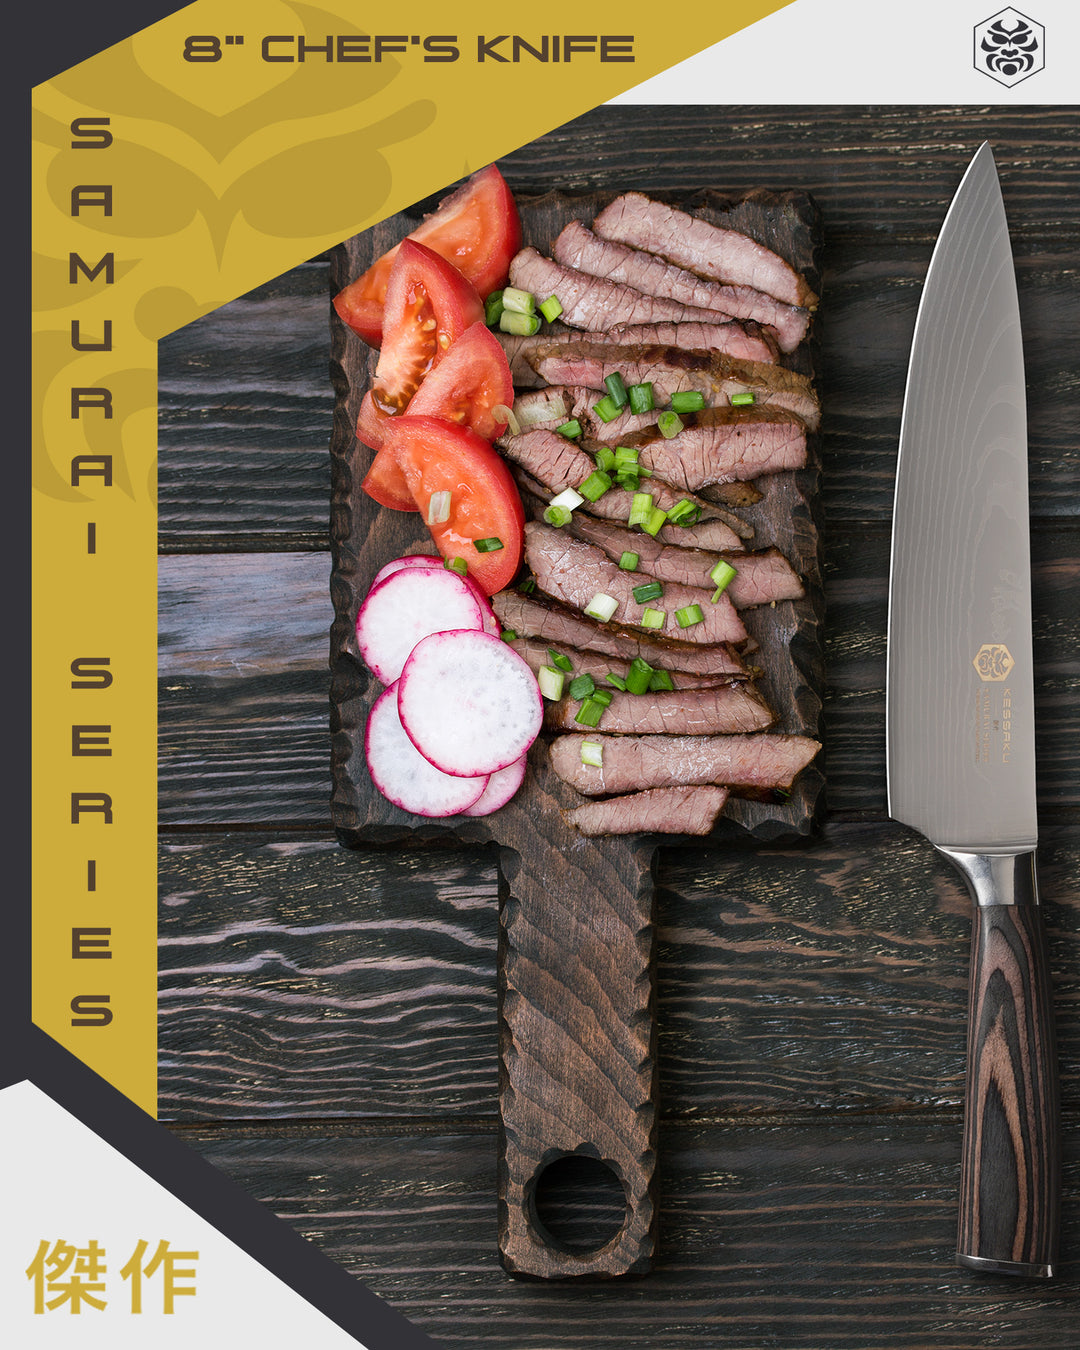 The Samurai Chef Knife with slices of steak, green onions, sliced tomato and radish